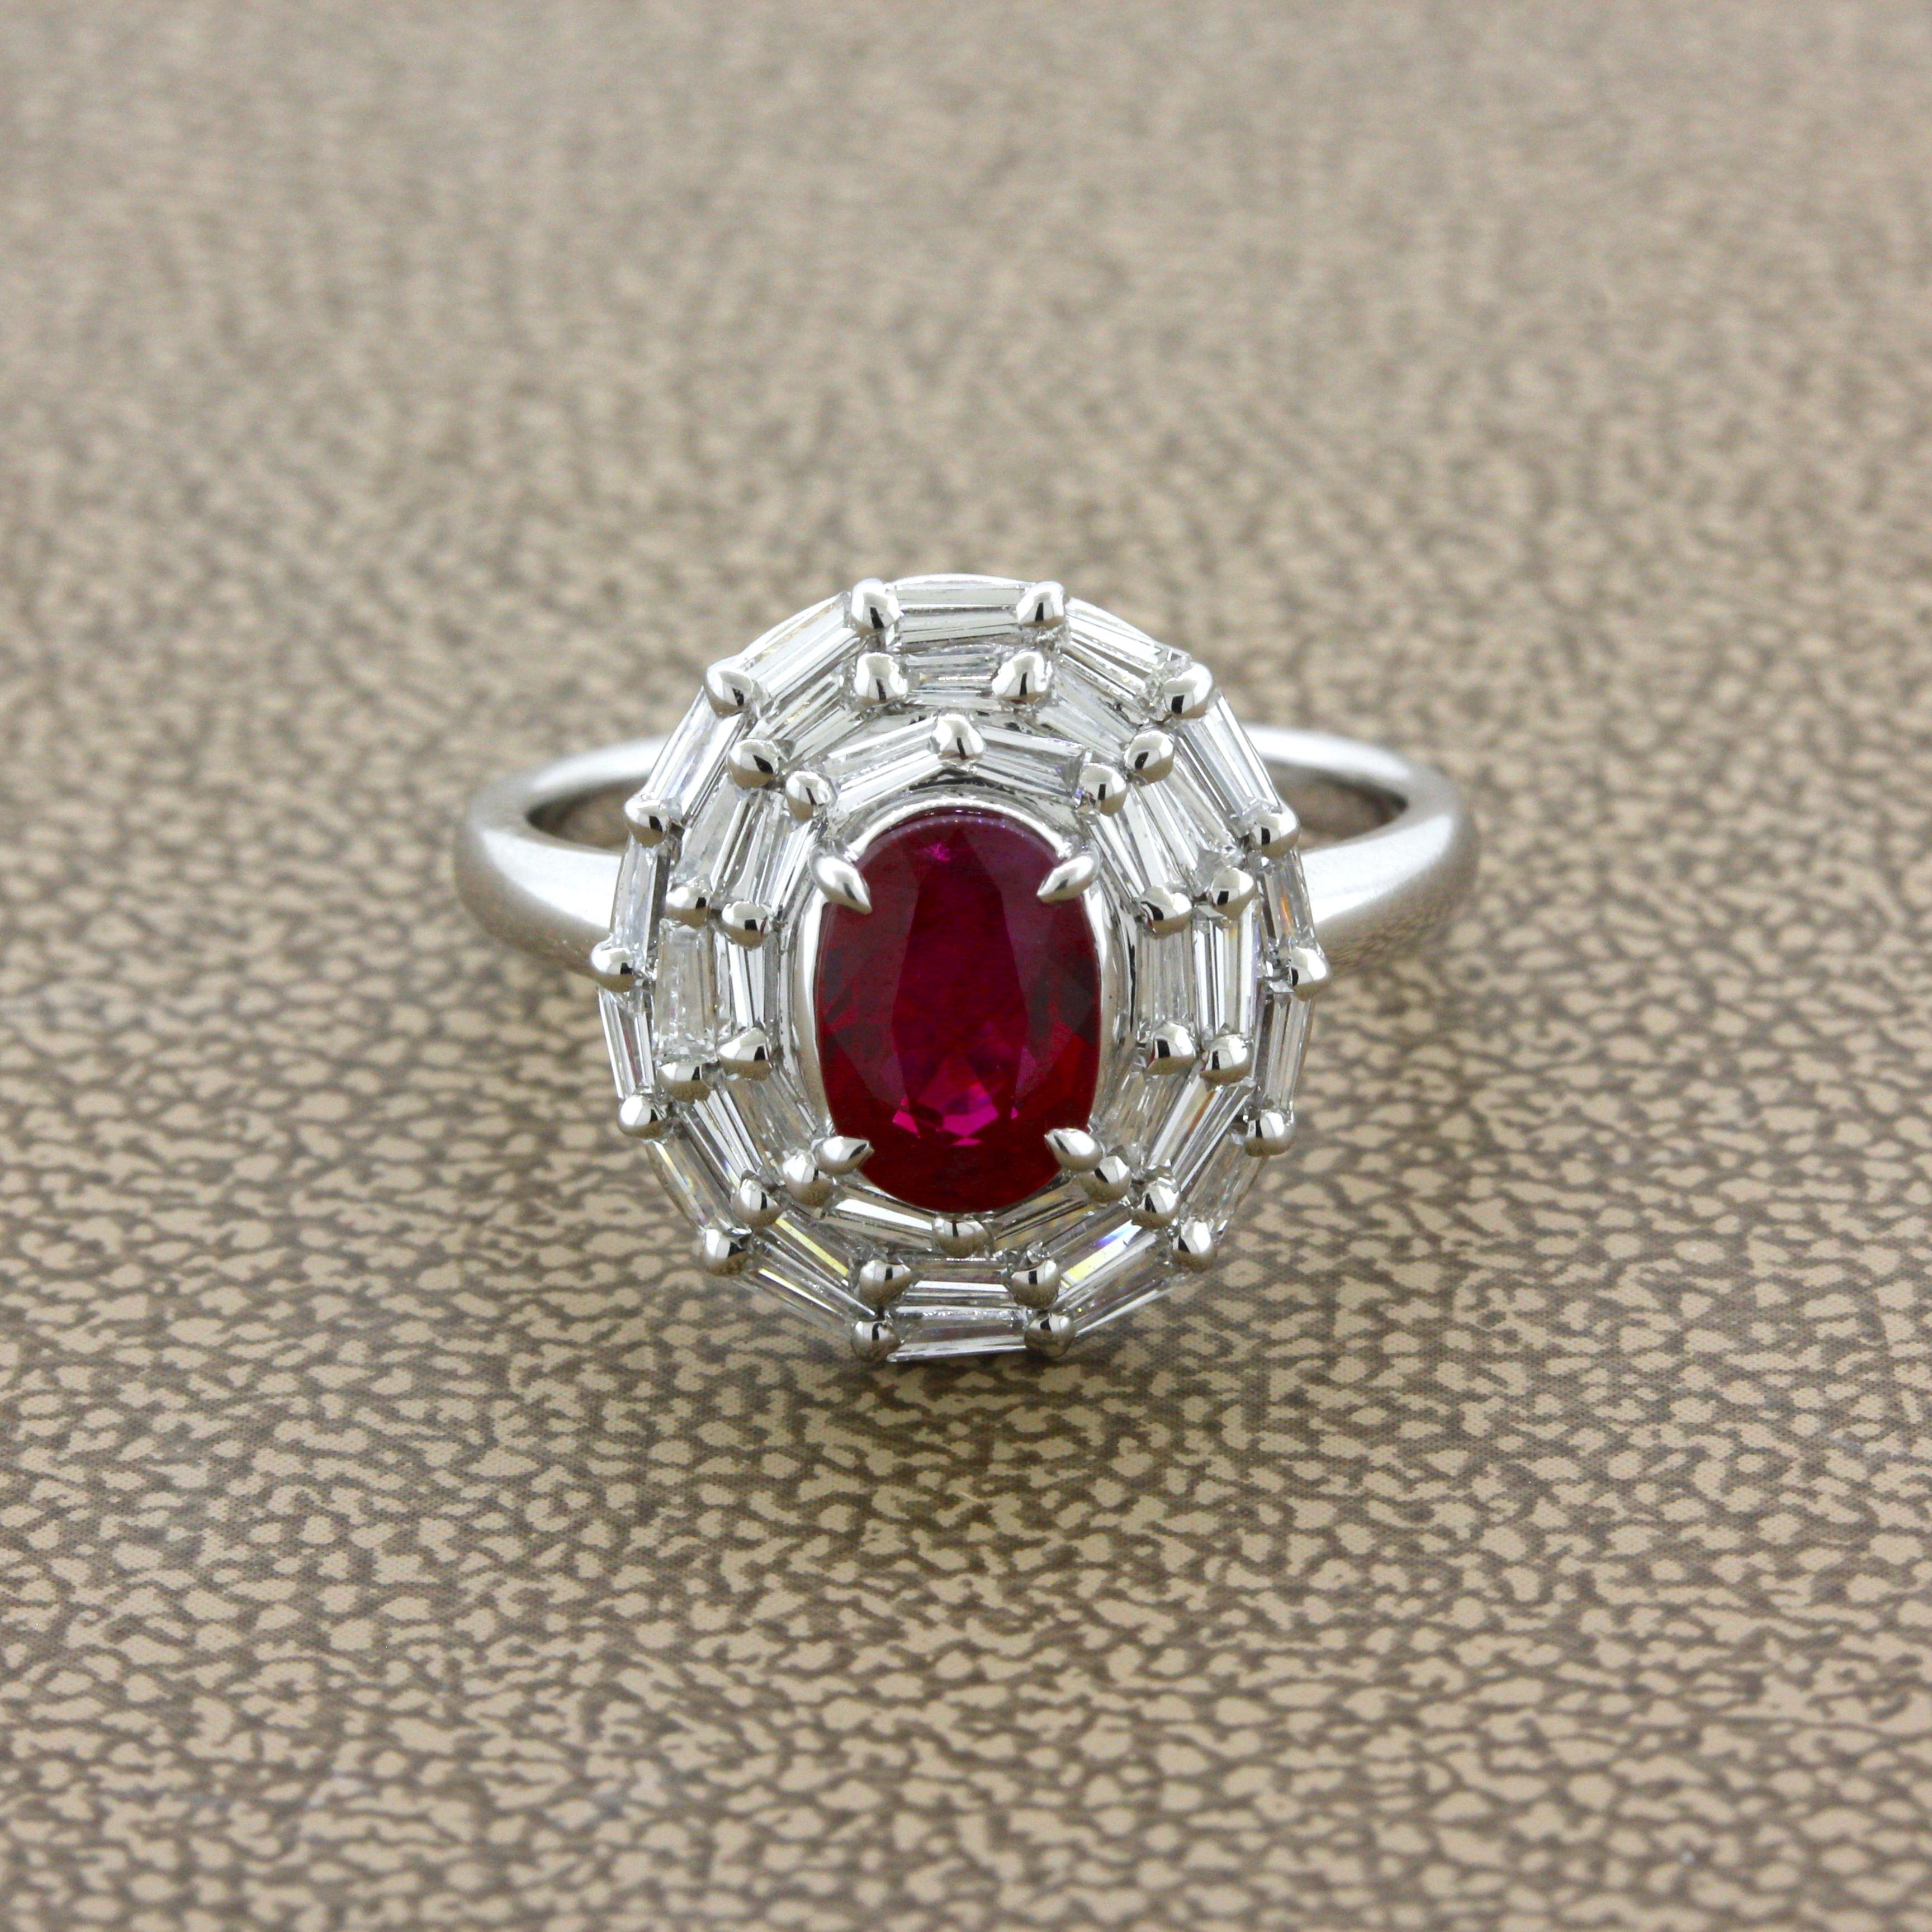 A rare and beautiful treasure! This lovely ruby weighs 1.47 carats and has the classic vivid red “pigeon blood” color which is known as coming from Burma. This is certified by the GIA as being “pigeon blood” with a Burmese origin. It is complemented